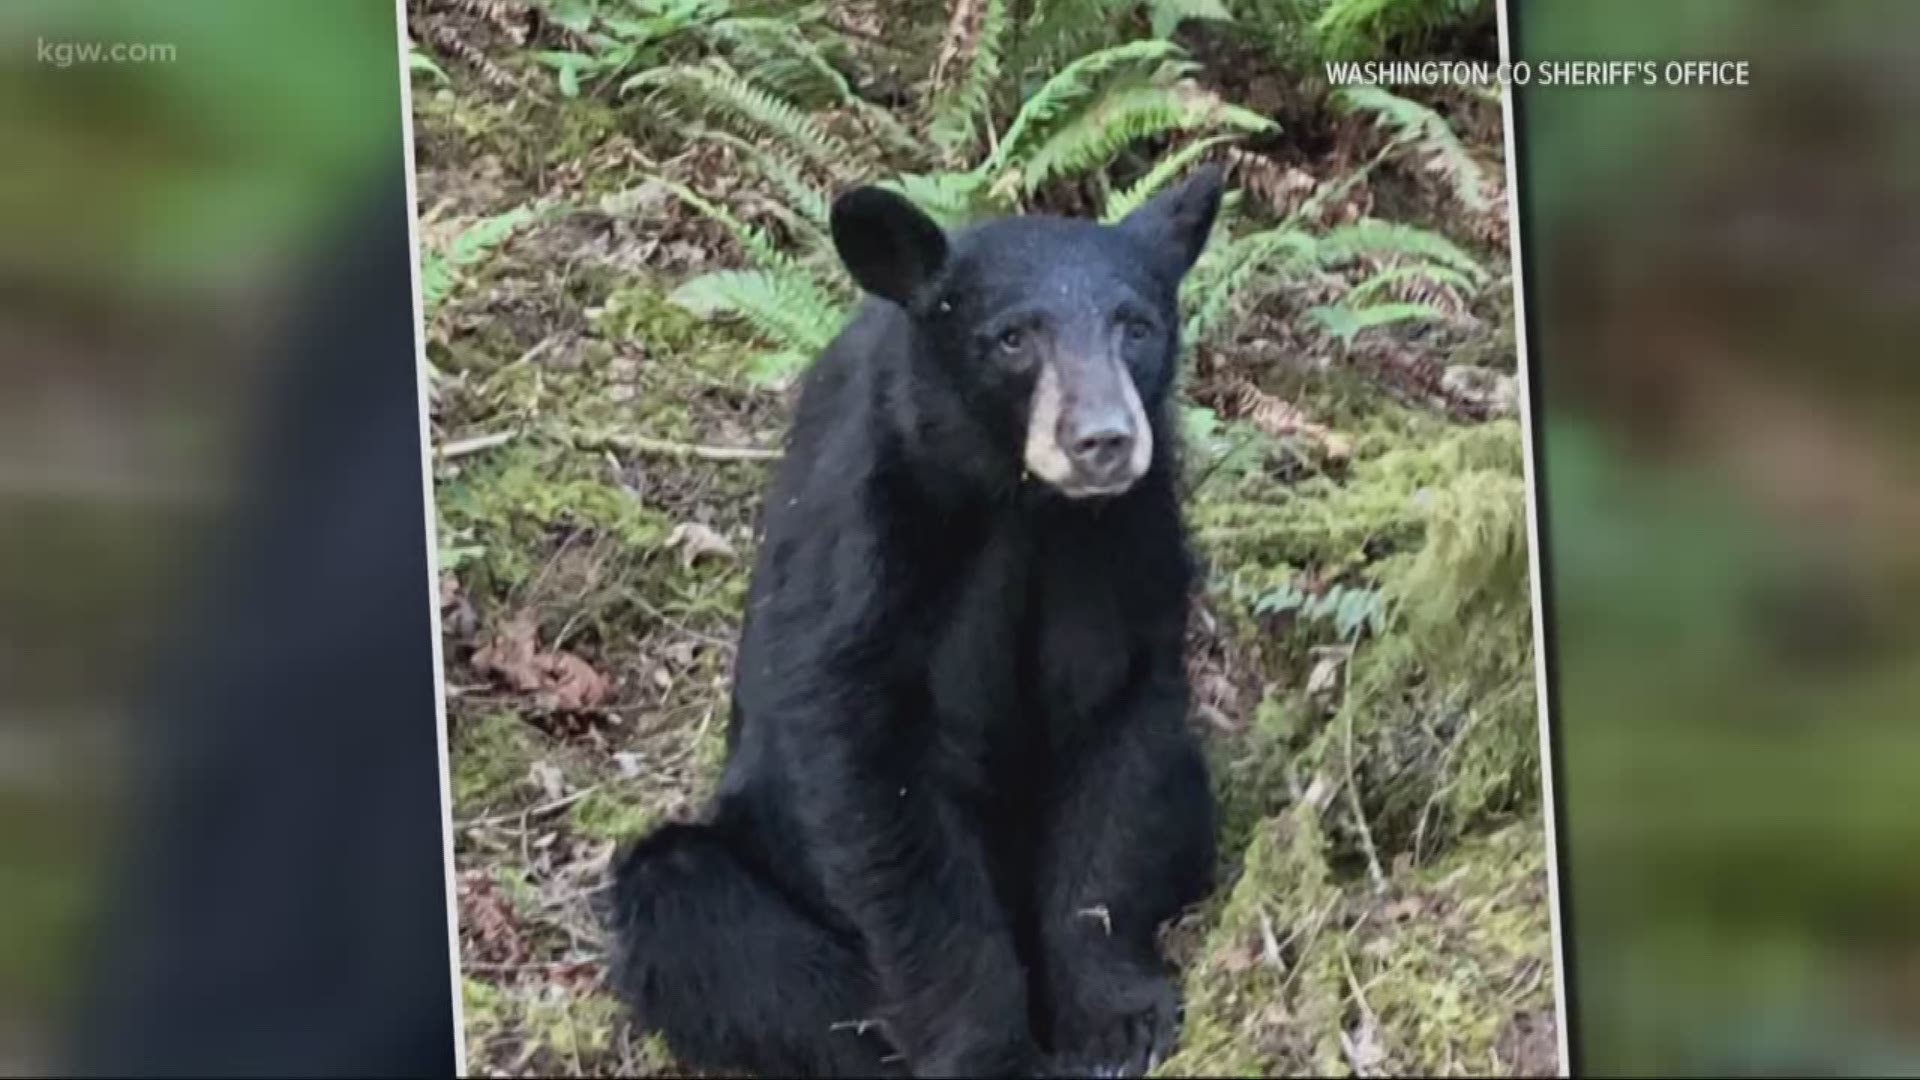 Wildlife officials are warning people not to feed wild animals after they were forced to kill a black bear near Hagg Lake.